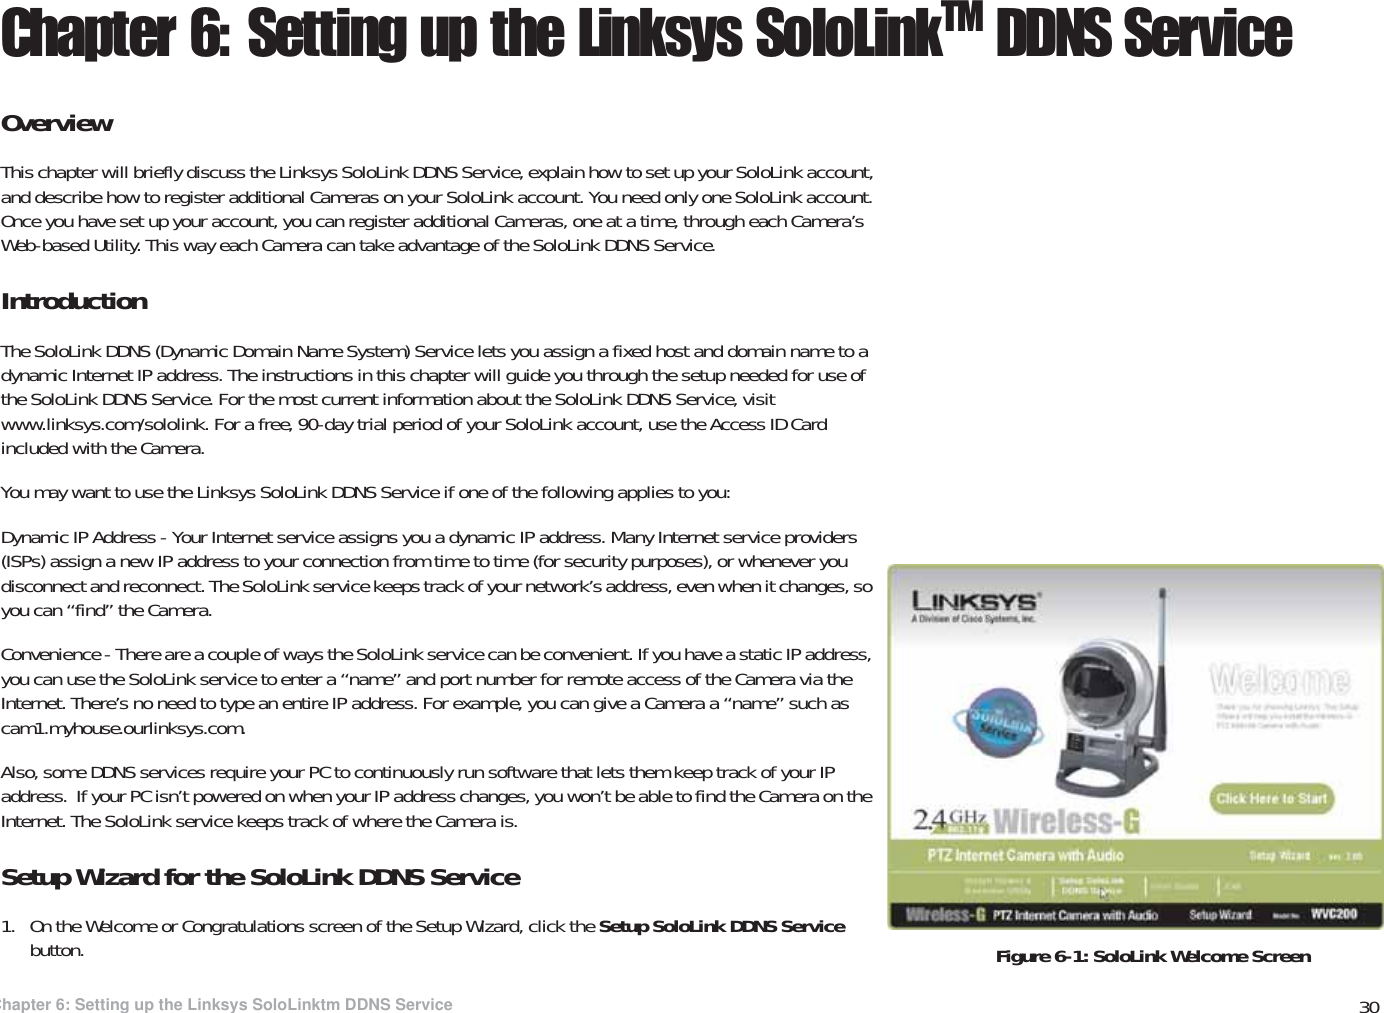 30Chapter 6: Setting up the Linksys SoloLinktm DDNS ServiceOverviewWireless-G PTZ Internet Video Camera with AudioChapter 6: Setting up the Linksys SoloLinkTM DDNS ServiceOverviewThis chapter will briefly discuss the Linksys SoloLink DDNS Service, explain how to set up your SoloLink account, and describe how to register additional Cameras on your SoloLink account. You need only one SoloLink account. Once you have set up your account, you can register additional Cameras, one at a time, through each Camera’s Web-based Utility. This way each Camera can take advantage of the SoloLink DDNS Service.IntroductionThe SoloLink DDNS (Dynamic Domain Name System) Service lets you assign a fixed host and domain name to a dynamic Internet IP address. The instructions in this chapter will guide you through the setup needed for use of the SoloLink DDNS Service. For the most current information about the SoloLink DDNS Service, visit www.linksys.com/sololink. For a free, 90-day trial period of your SoloLink account, use the Access ID Card included with the Camera.You may want to use the Linksys SoloLink DDNS Service if one of the following applies to you:Dynamic IP Address - Your Internet service assigns you a dynamic IP address. Many Internet service providers (ISPs) assign a new IP address to your connection from time to time (for security purposes), or whenever you disconnect and reconnect. The SoloLink service keeps track of your network’s address, even when it changes, so you can “find” the Camera.Convenience - There are a couple of ways the SoloLink service can be convenient. If you have a static IP address, you can use the SoloLink service to enter a “name” and port number for remote access of the Camera via the Internet. There’s no need to type an entire IP address. For example, you can give a Camera a “name” such as cam1.myhouse.ourlinksys.com.Also, some DDNS services require your PC to continuously run software that lets them keep track of your IP address.  If your PC isn’t powered on when your IP address changes, you won’t be able to find the Camera on the Internet. The SoloLink service keeps track of where the Camera is.Setup Wizard for the SoloLink DDNS Service1. On the Welcome or Congratulations screen of the Setup Wizard, click the Setup SoloLink DDNS Service button.  Figure 6-1: SoloLink Welcome Screen